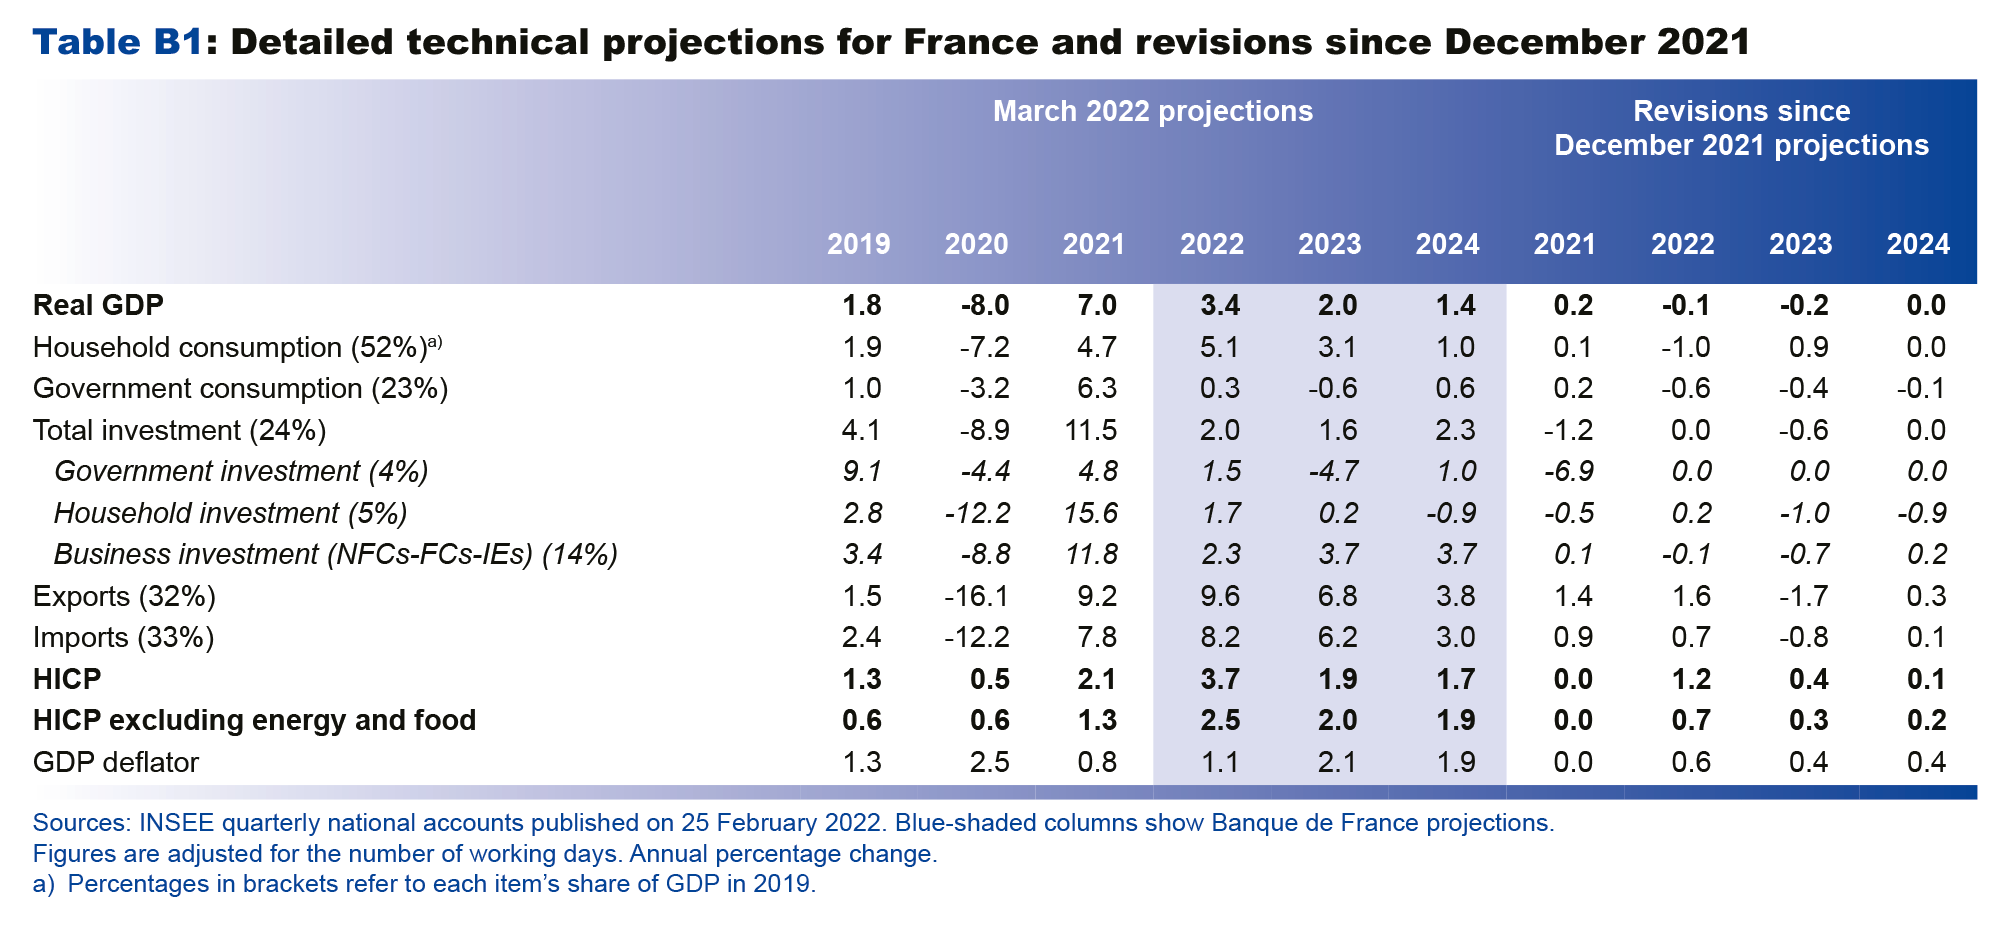 Macroeconomic projections – March 2022 - Detailed technical projections for France and revisions since December 2021